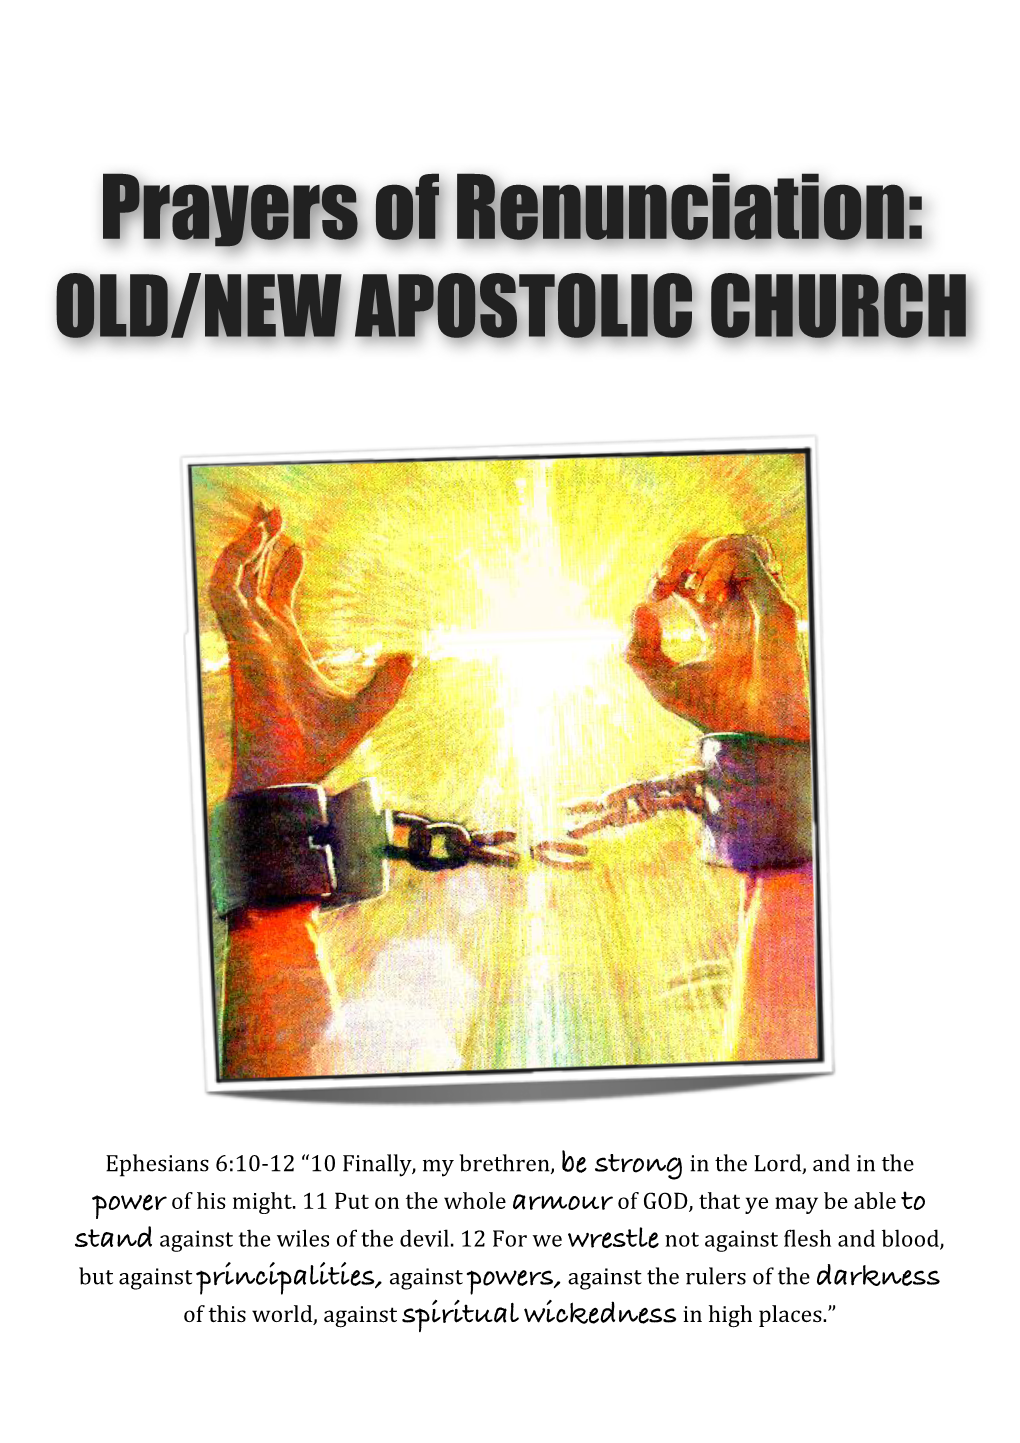 Prayer of Renunciation for the Old and New Apostolic Church